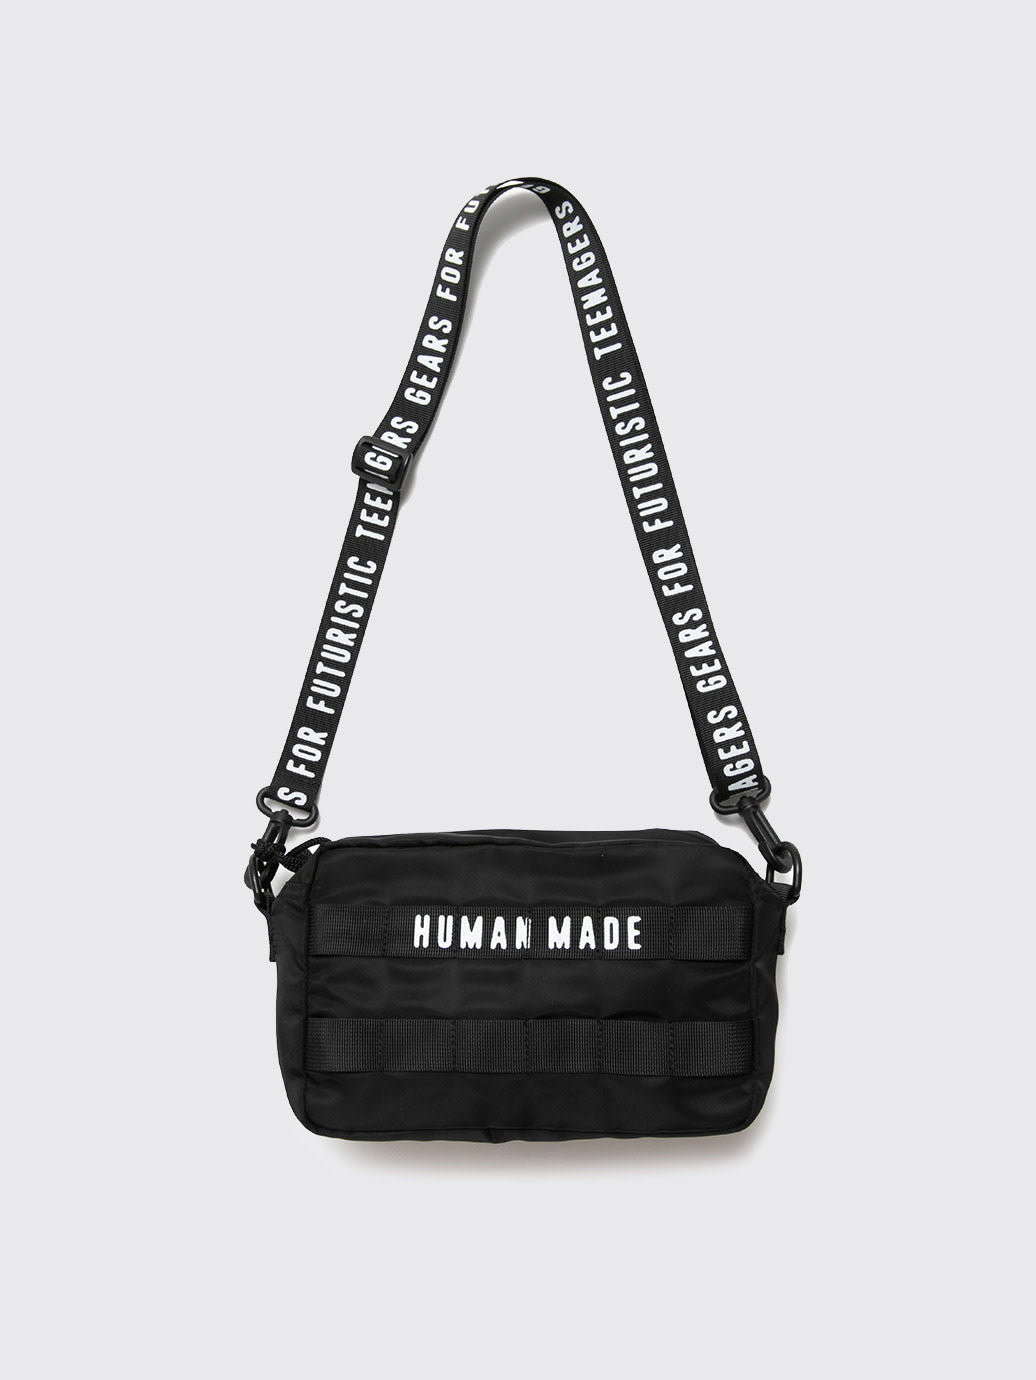 HUMAN MADE Military Pouch #1 Black ショルダー 返品交換不可 メンズ ...